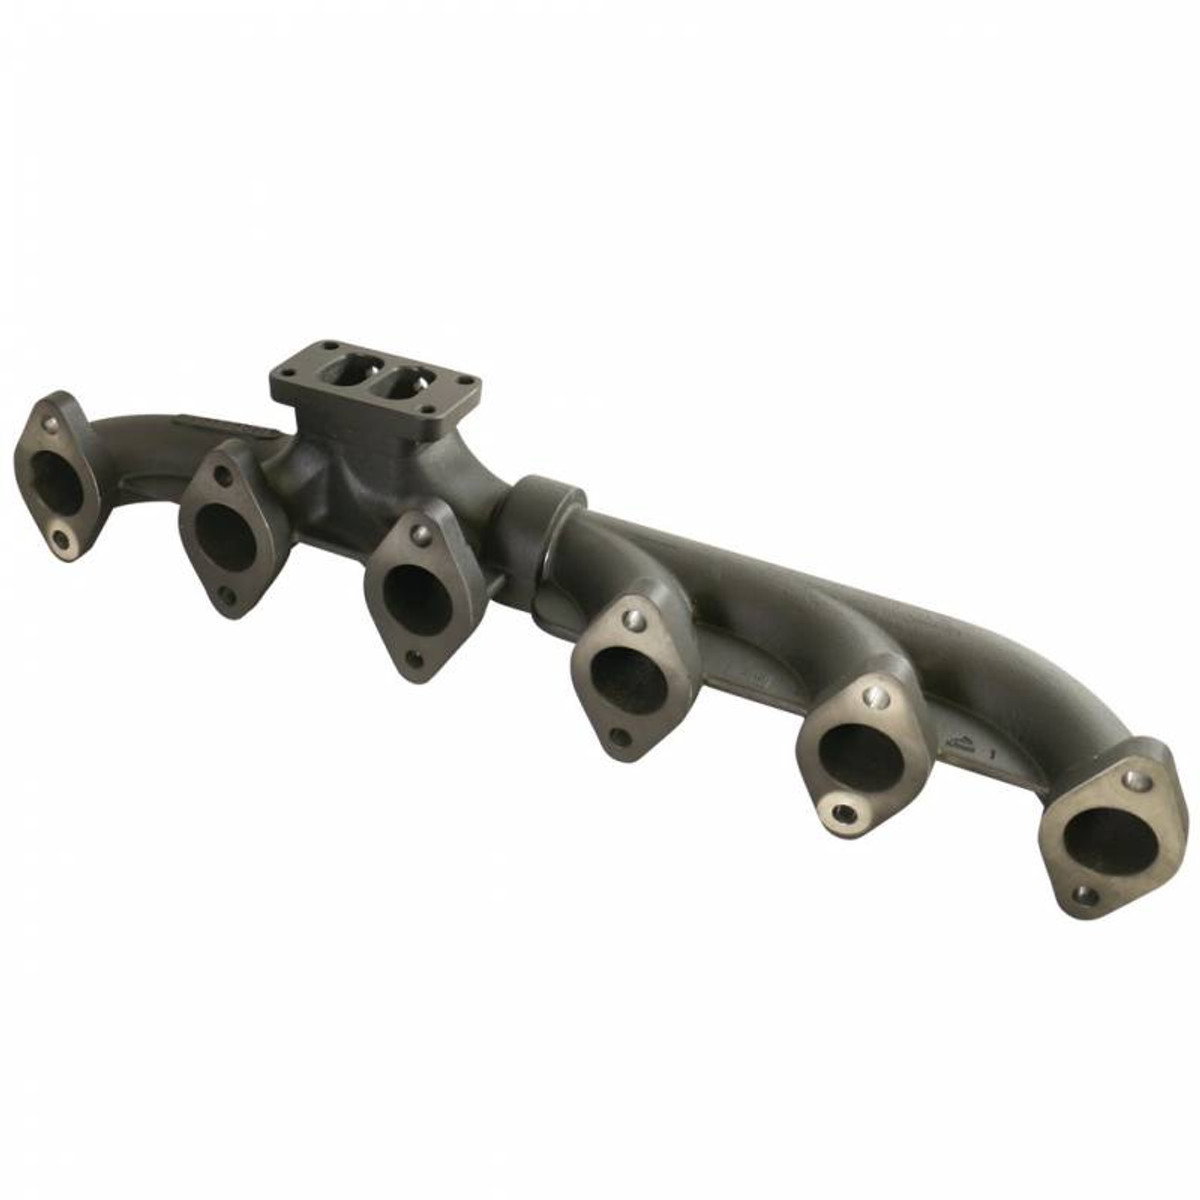 2003-2007 Dodge 5.9L Stock Replacement 2 Piece Exhaust Manifold 1045987